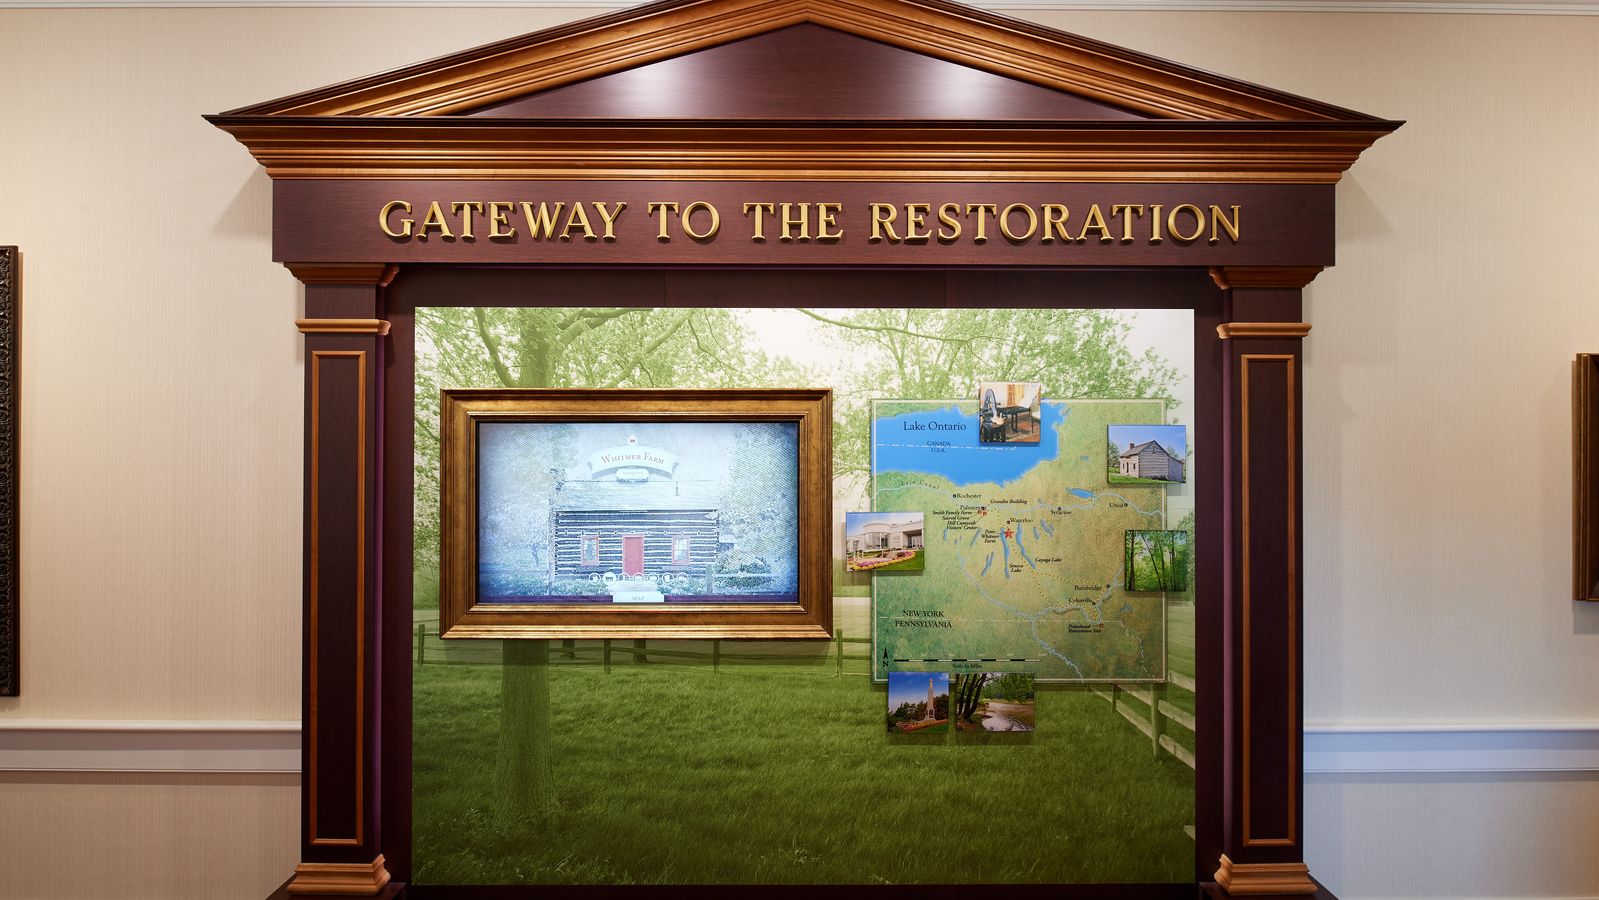 Interior shot of the Visitors' Center at the Priesthood Restoration Site near Susquehanna Depot, Pennsylvania. The sign has a map of the sites nearby.